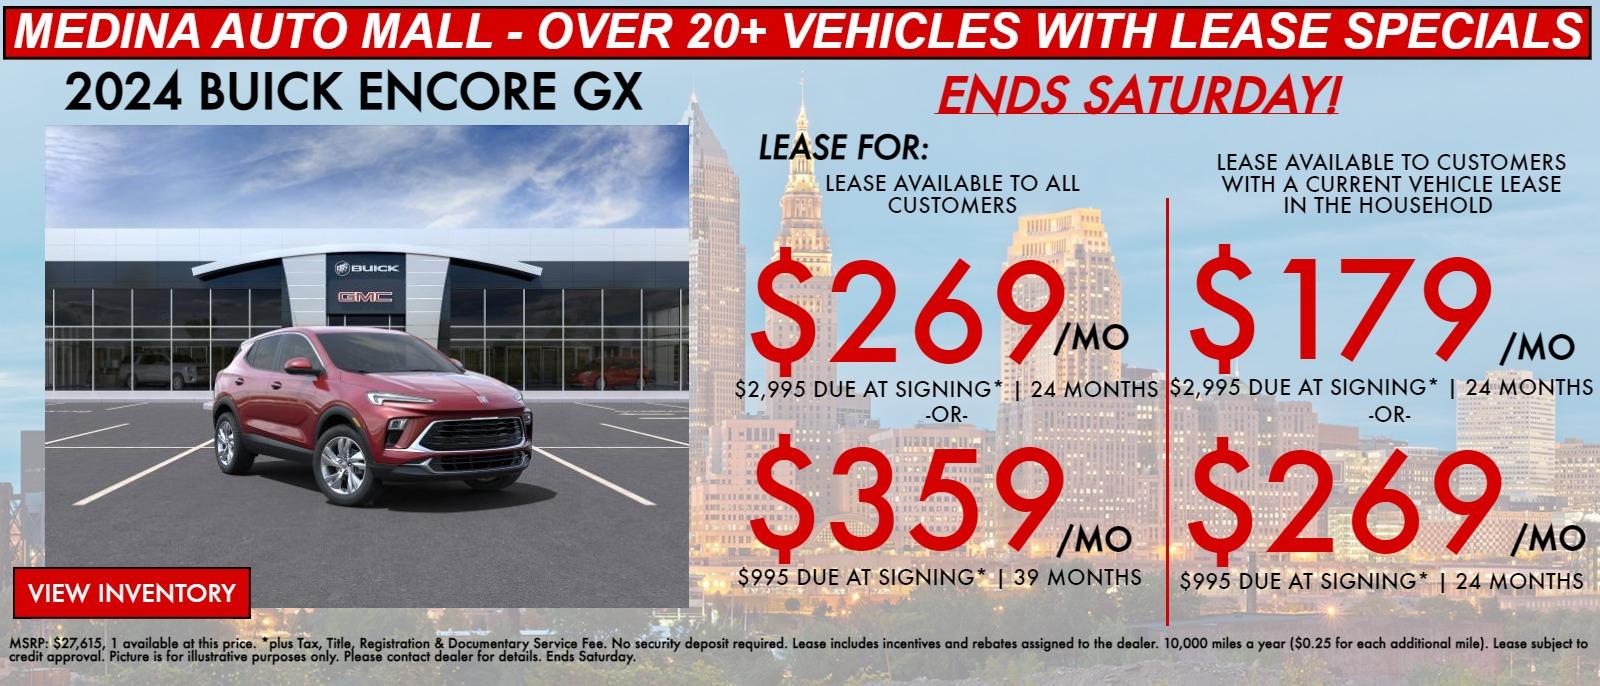 ENCORE GX lease special deals in Medina, OH